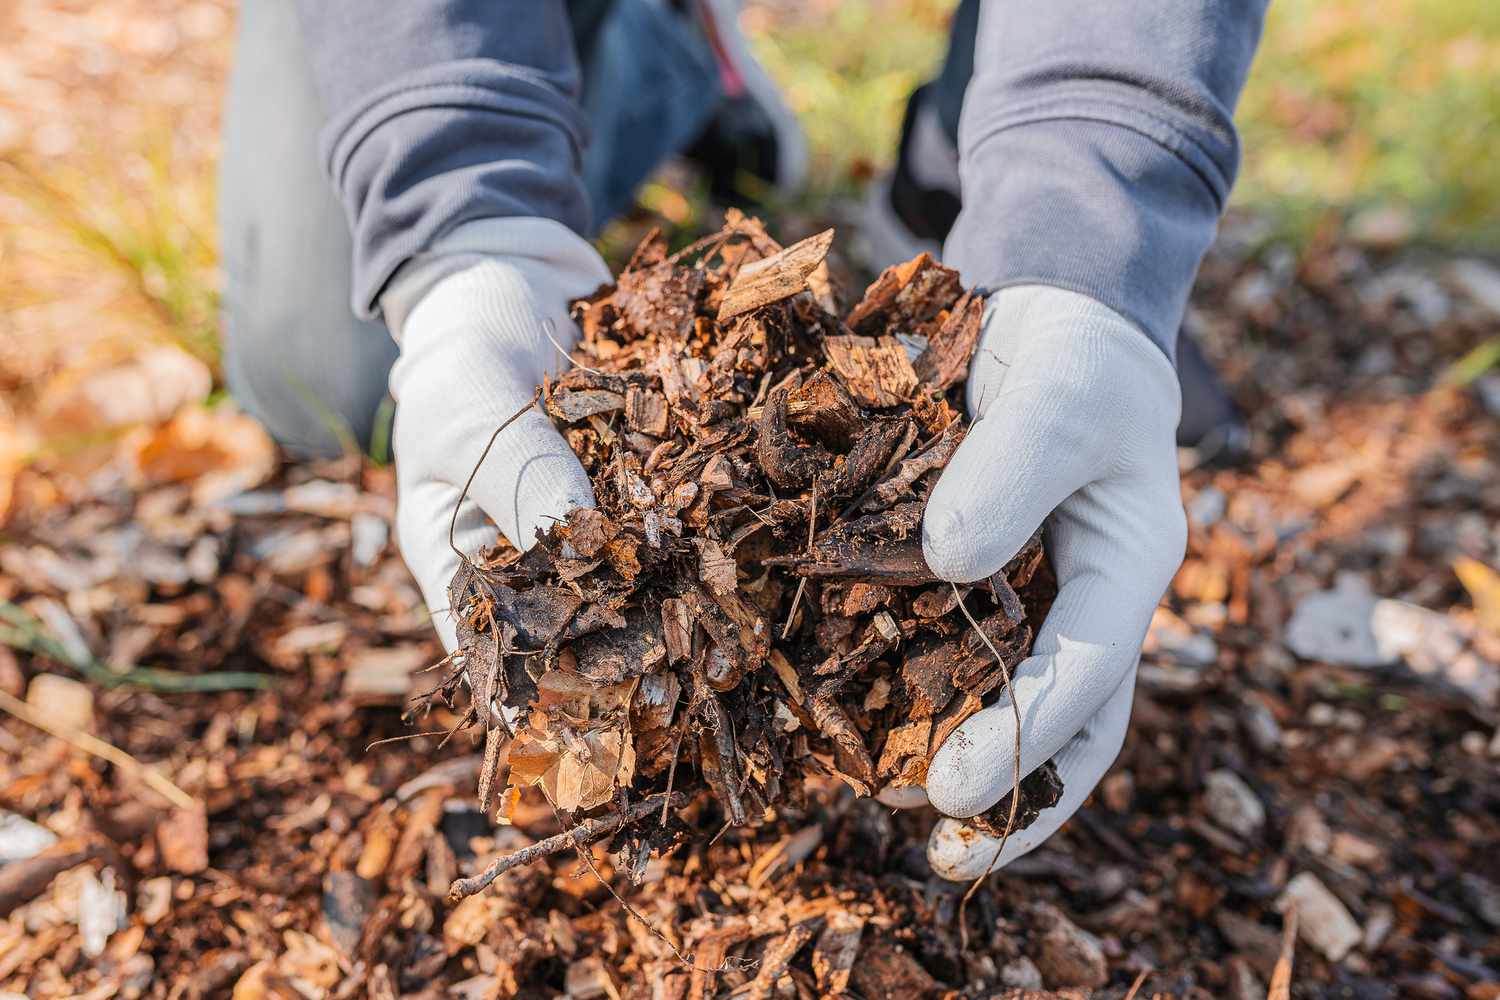 Mulch Madness Returns to Ravenswood